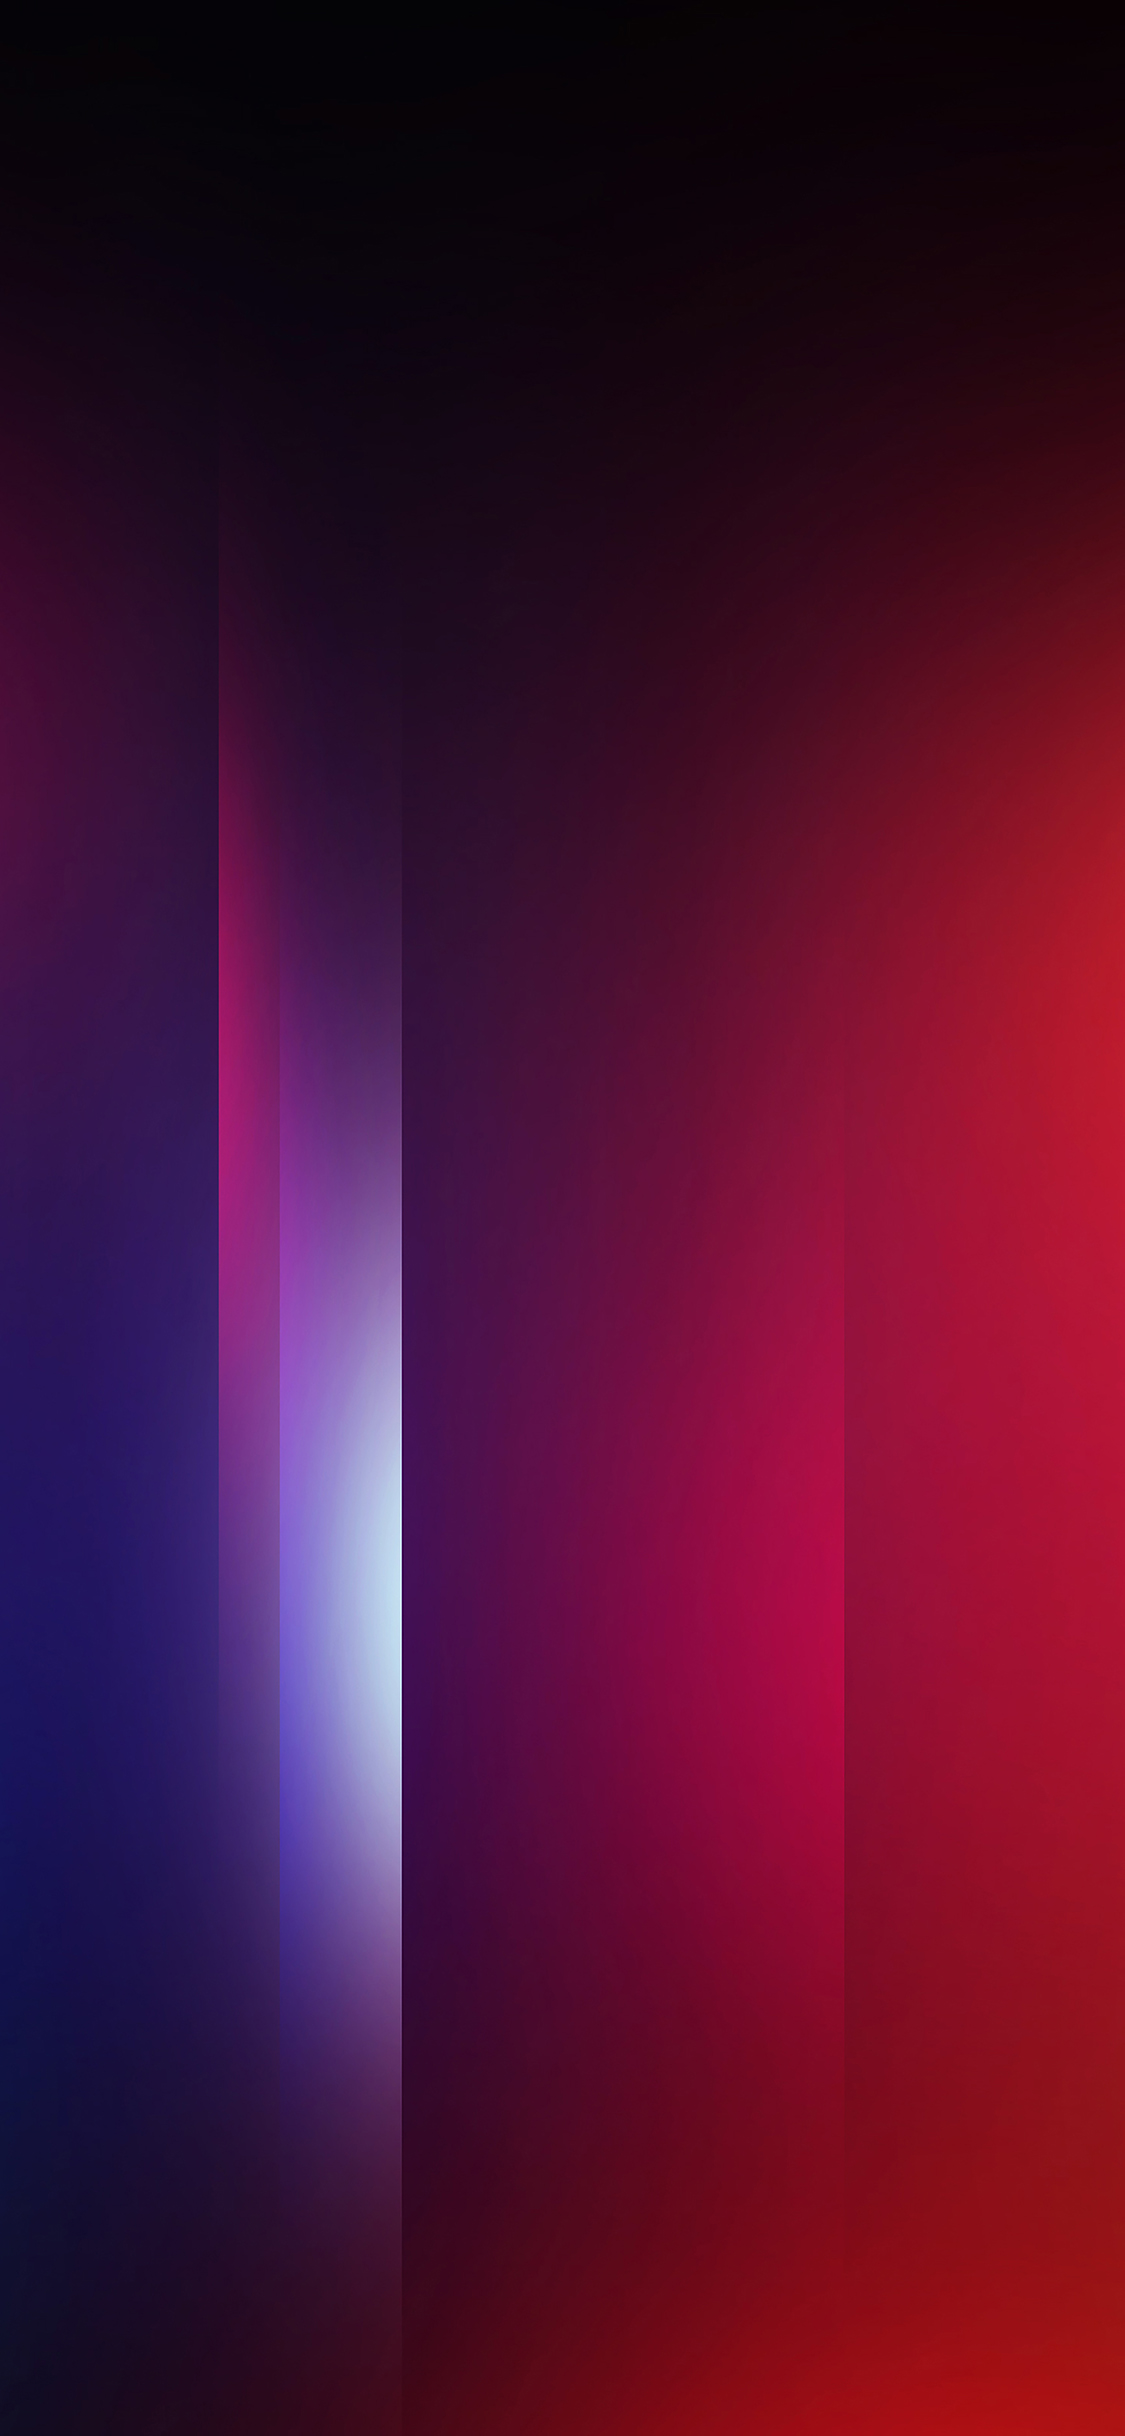 Abstract 4k Wallpaper For Iphone - HD Wallpaper 